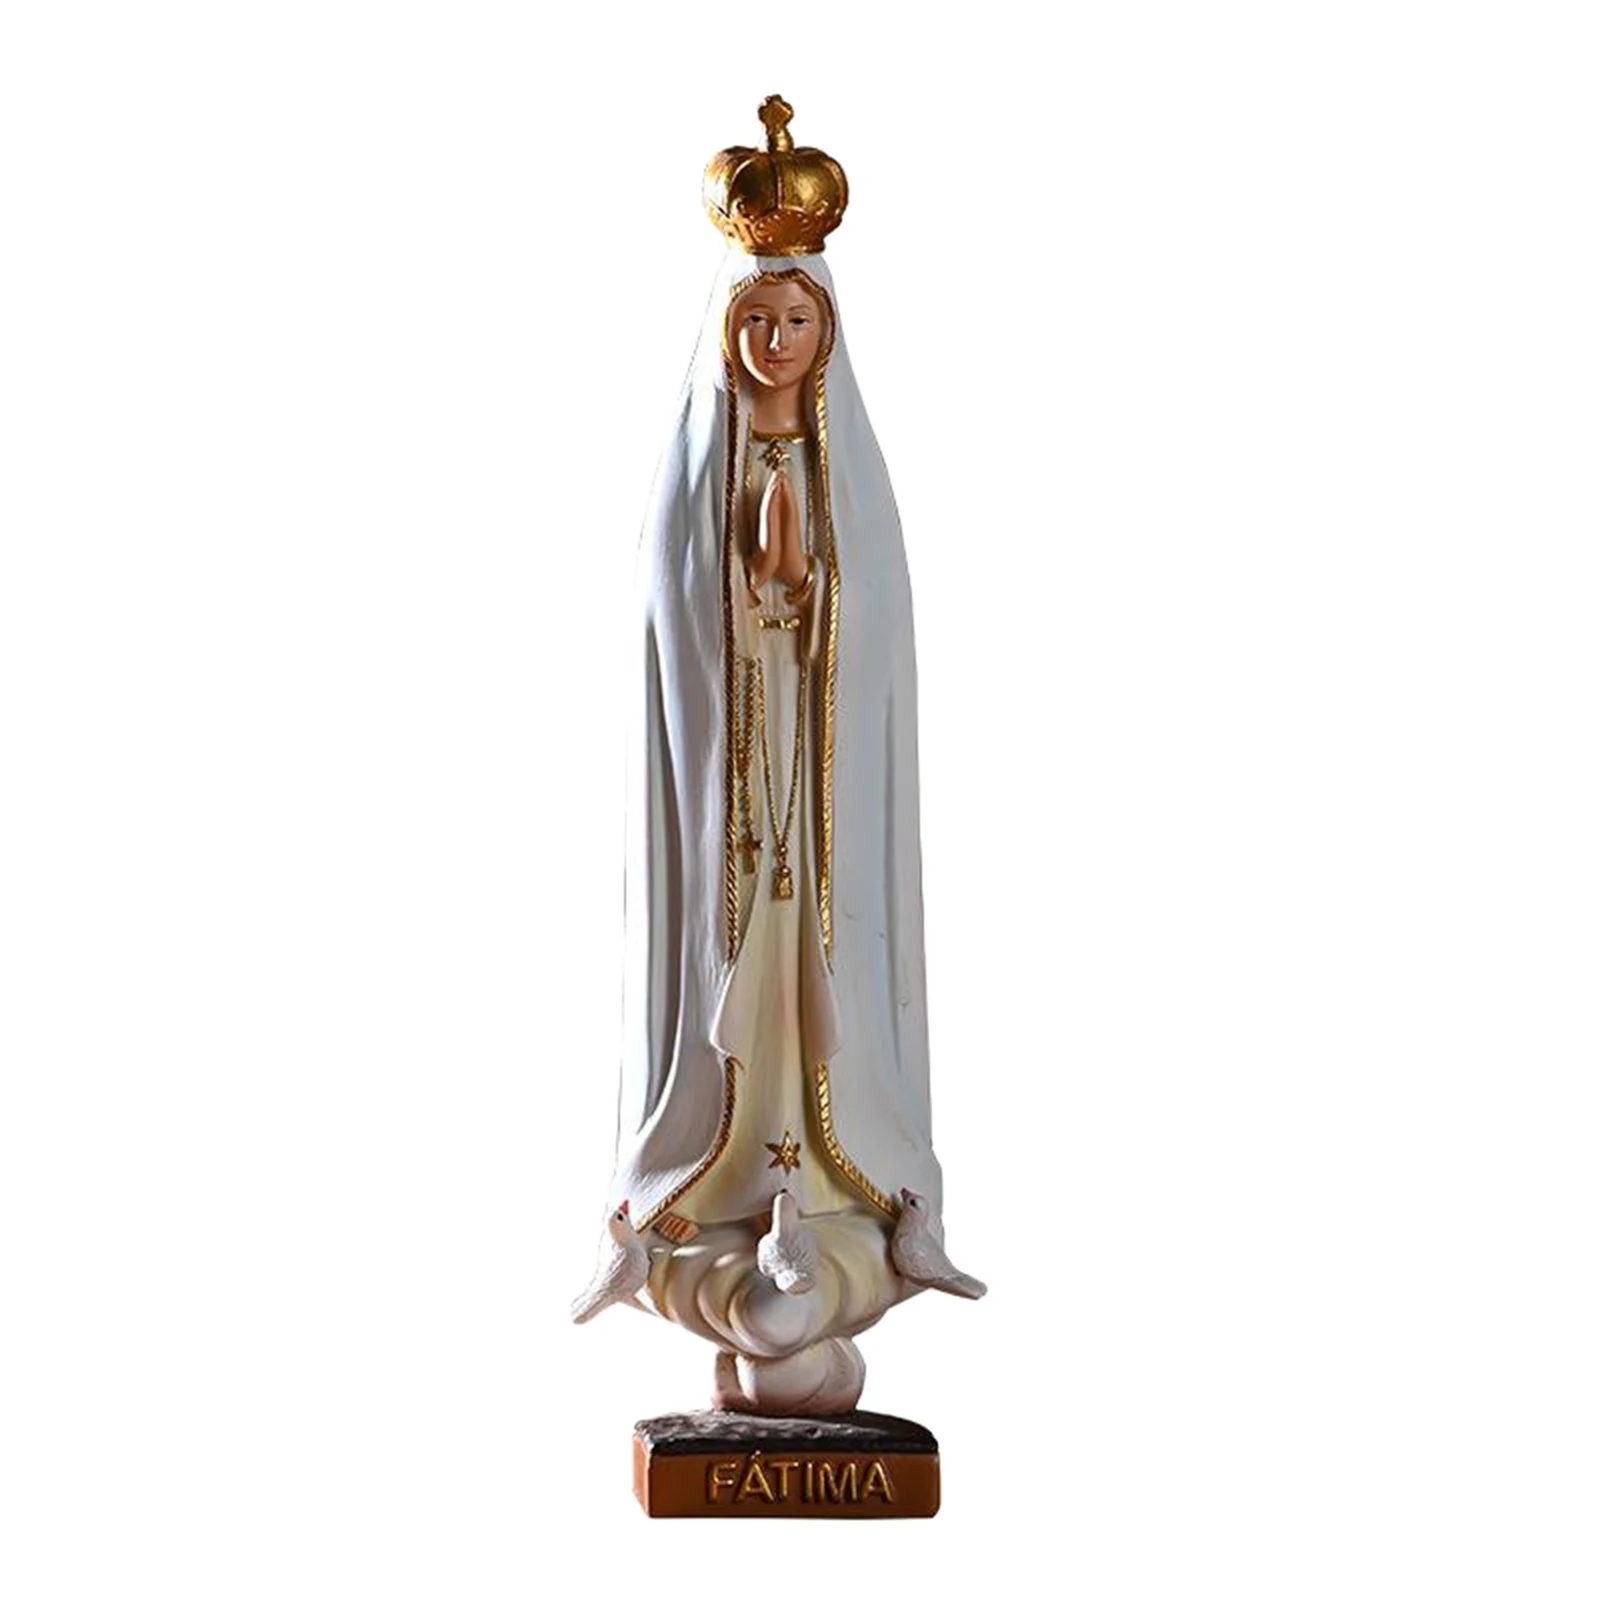 

European Style Virgin Mary Statue Resin Christianity Jesus Decorative Small Ornaments Desktop Home Church Decorations